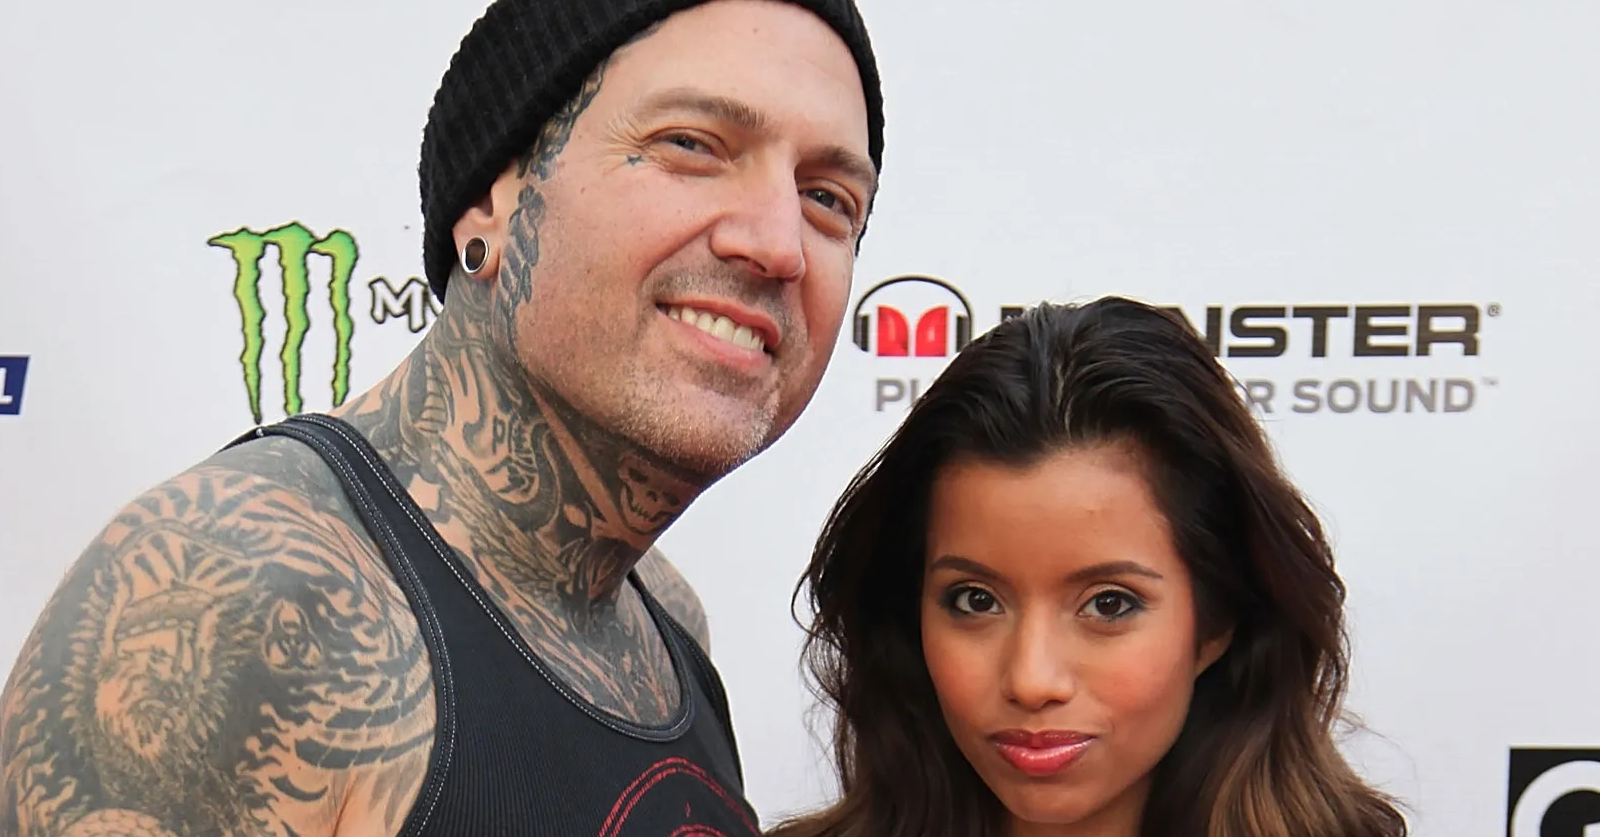 Lupe Porn Star - Porn Star Little Lupe Files For Divorce From 'Biohazard' Frontman